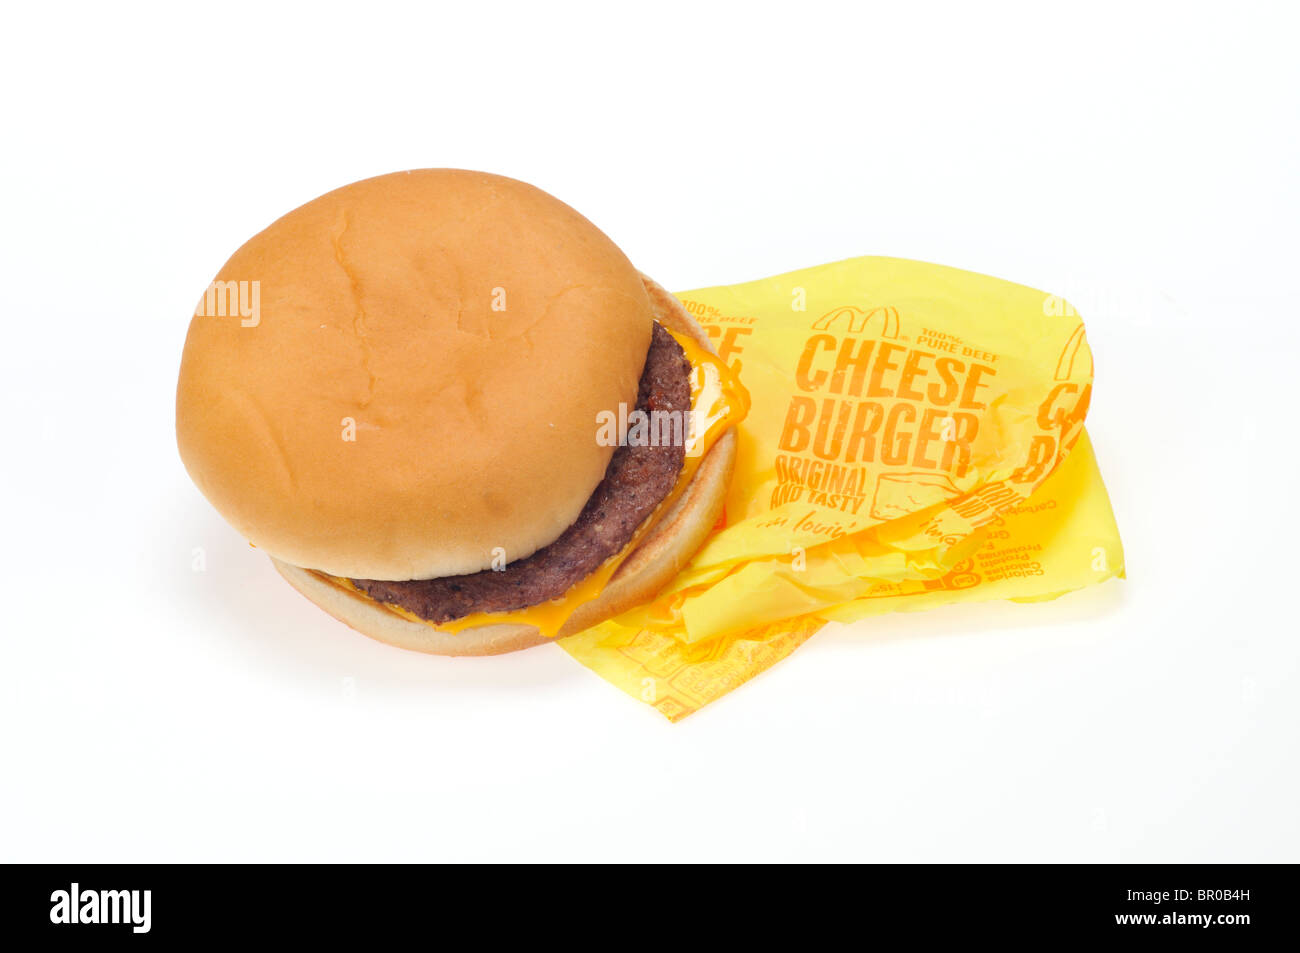 McDonald's cheeseburger with paper wrapper on white background, cut out. Stock Photo